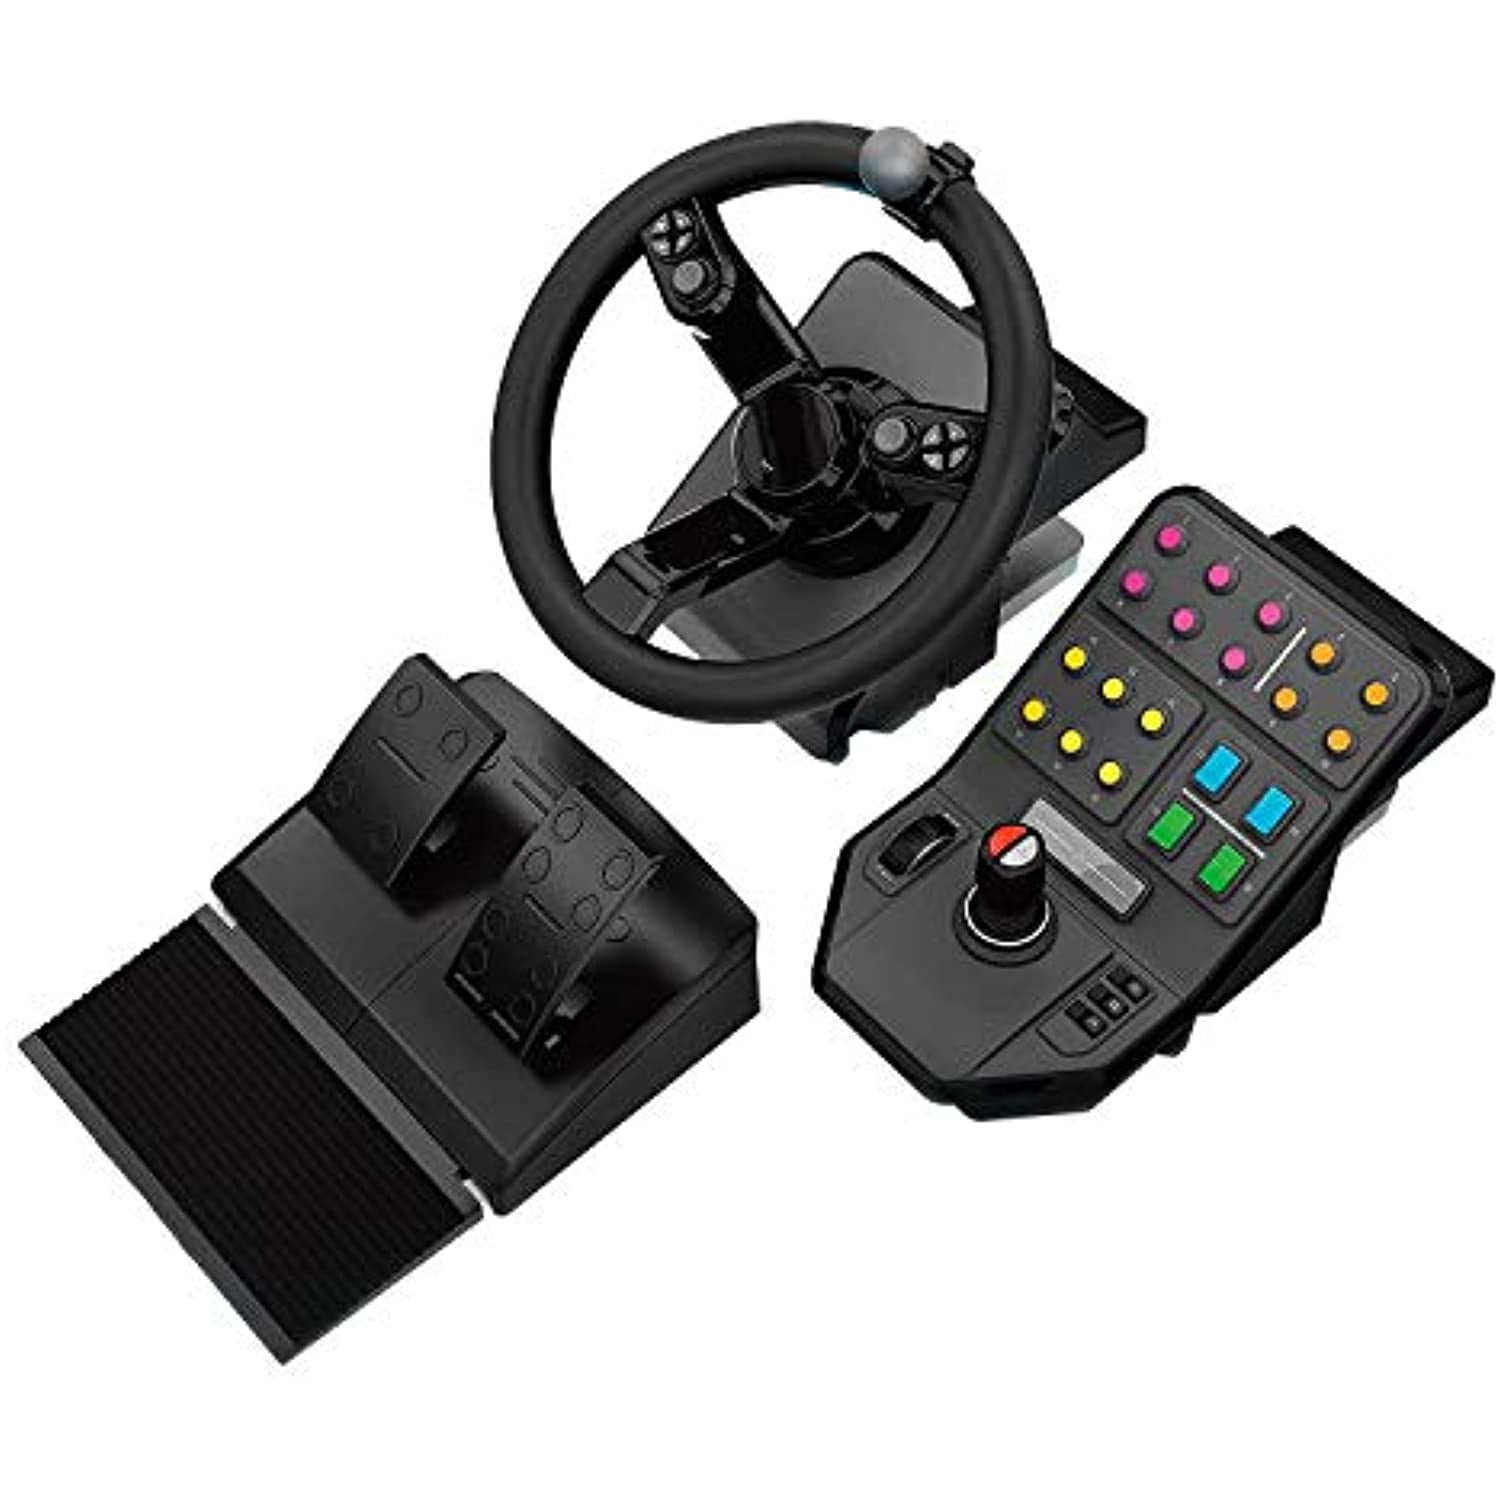 Logitech G Farm Simulator Heavy Equipment Bundle (2Nd Generation), Steering Wheel Controller For Farm Simulation 19 (Or Older), Wheel, Pedals, Vehicle Side Control For Pc -